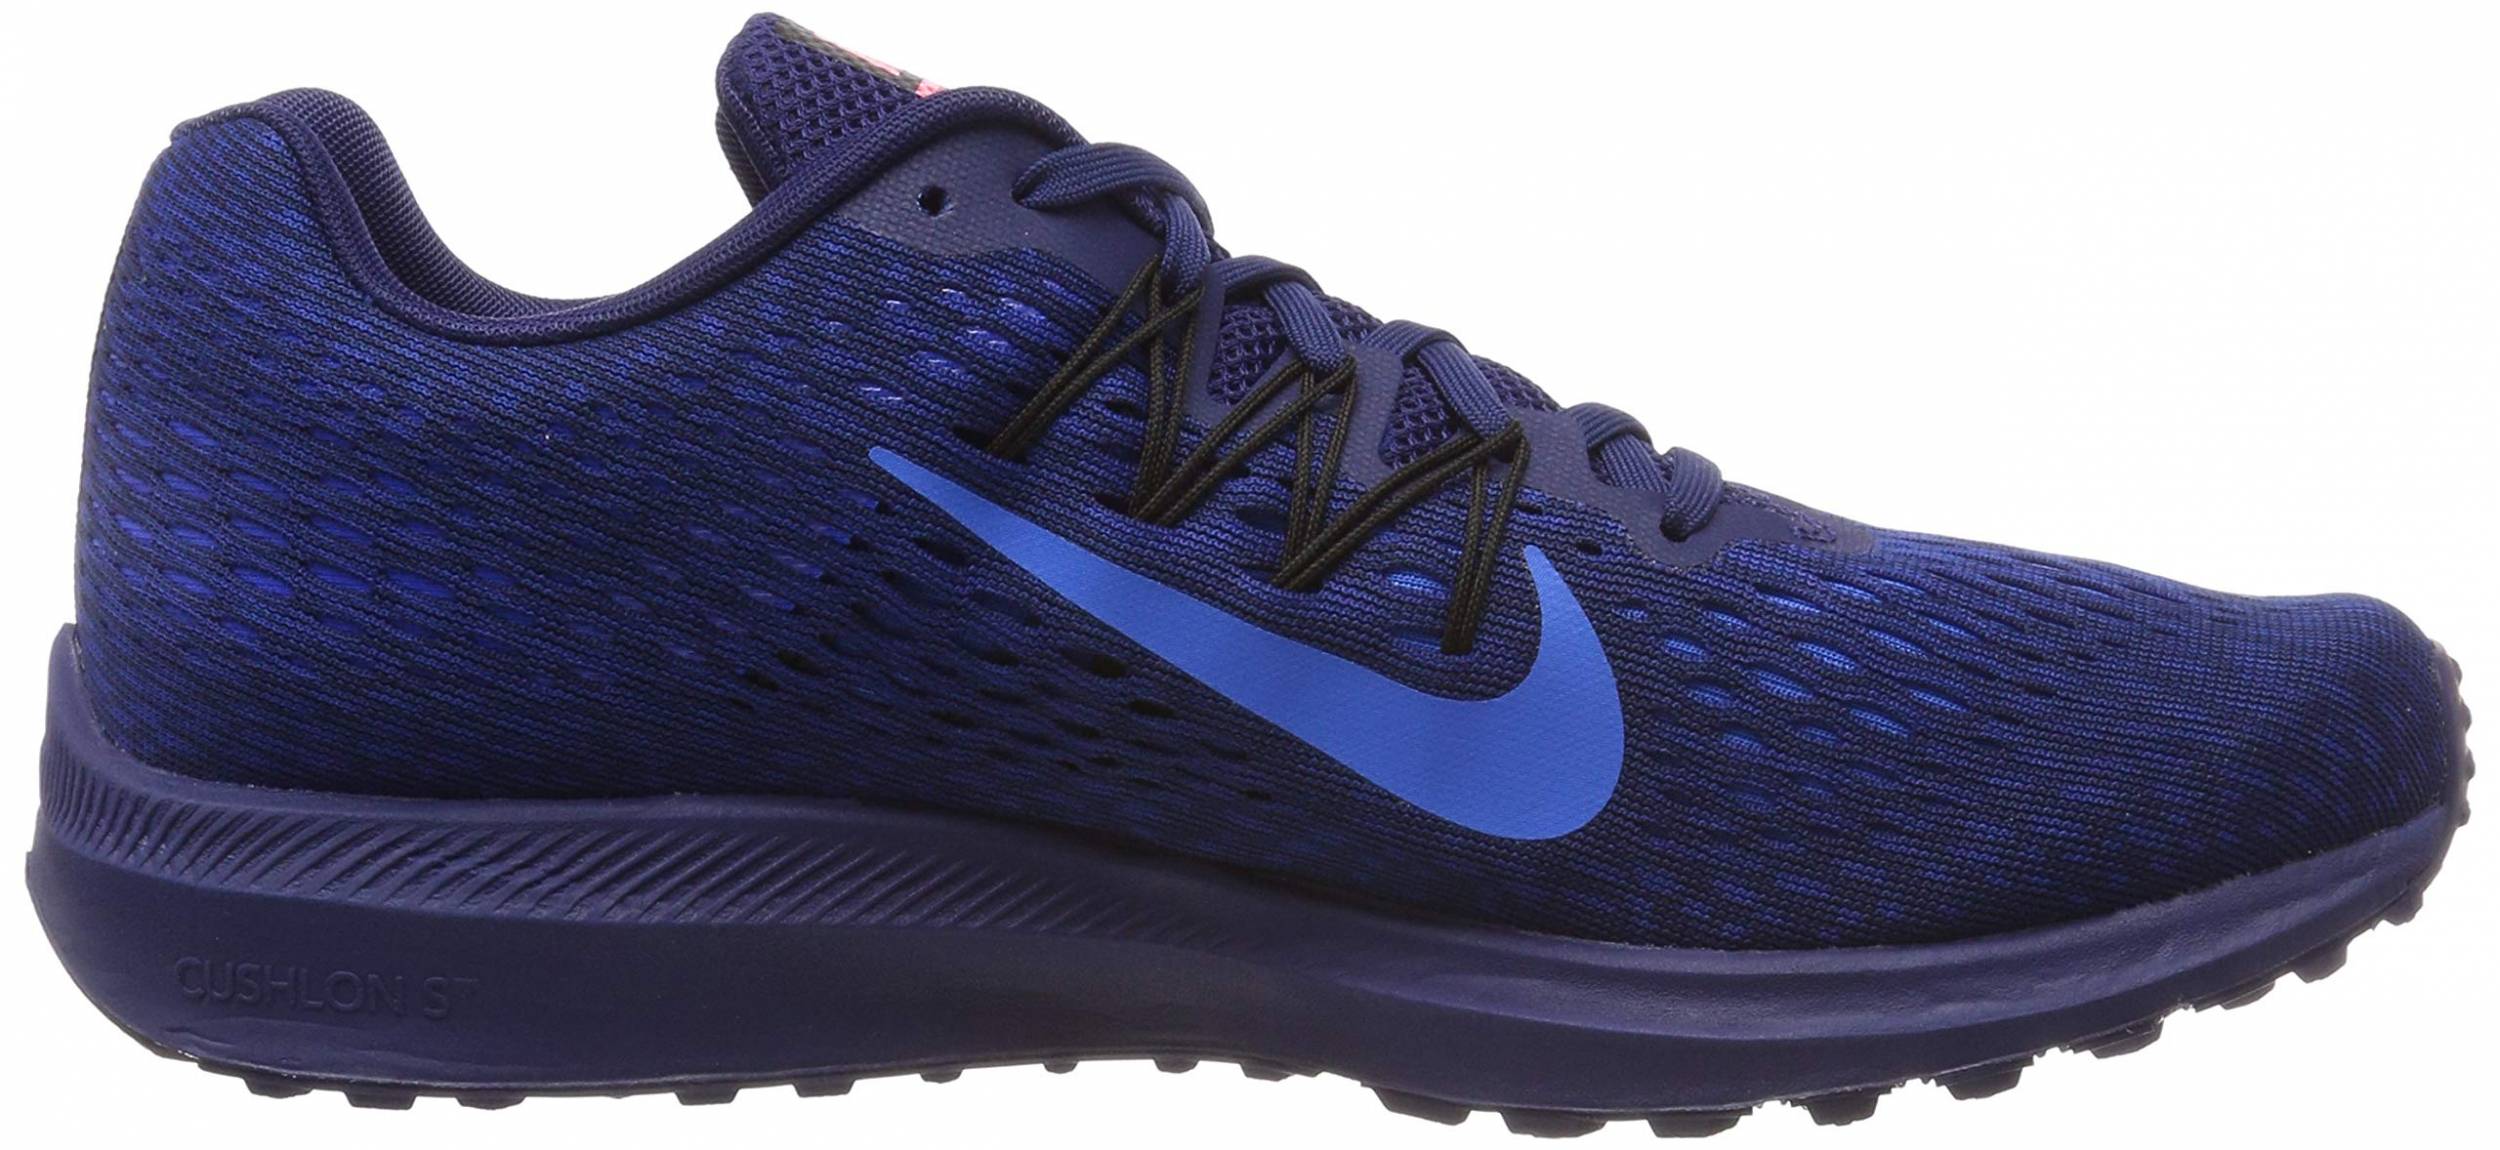 nike air zoom winflo 5 women's review